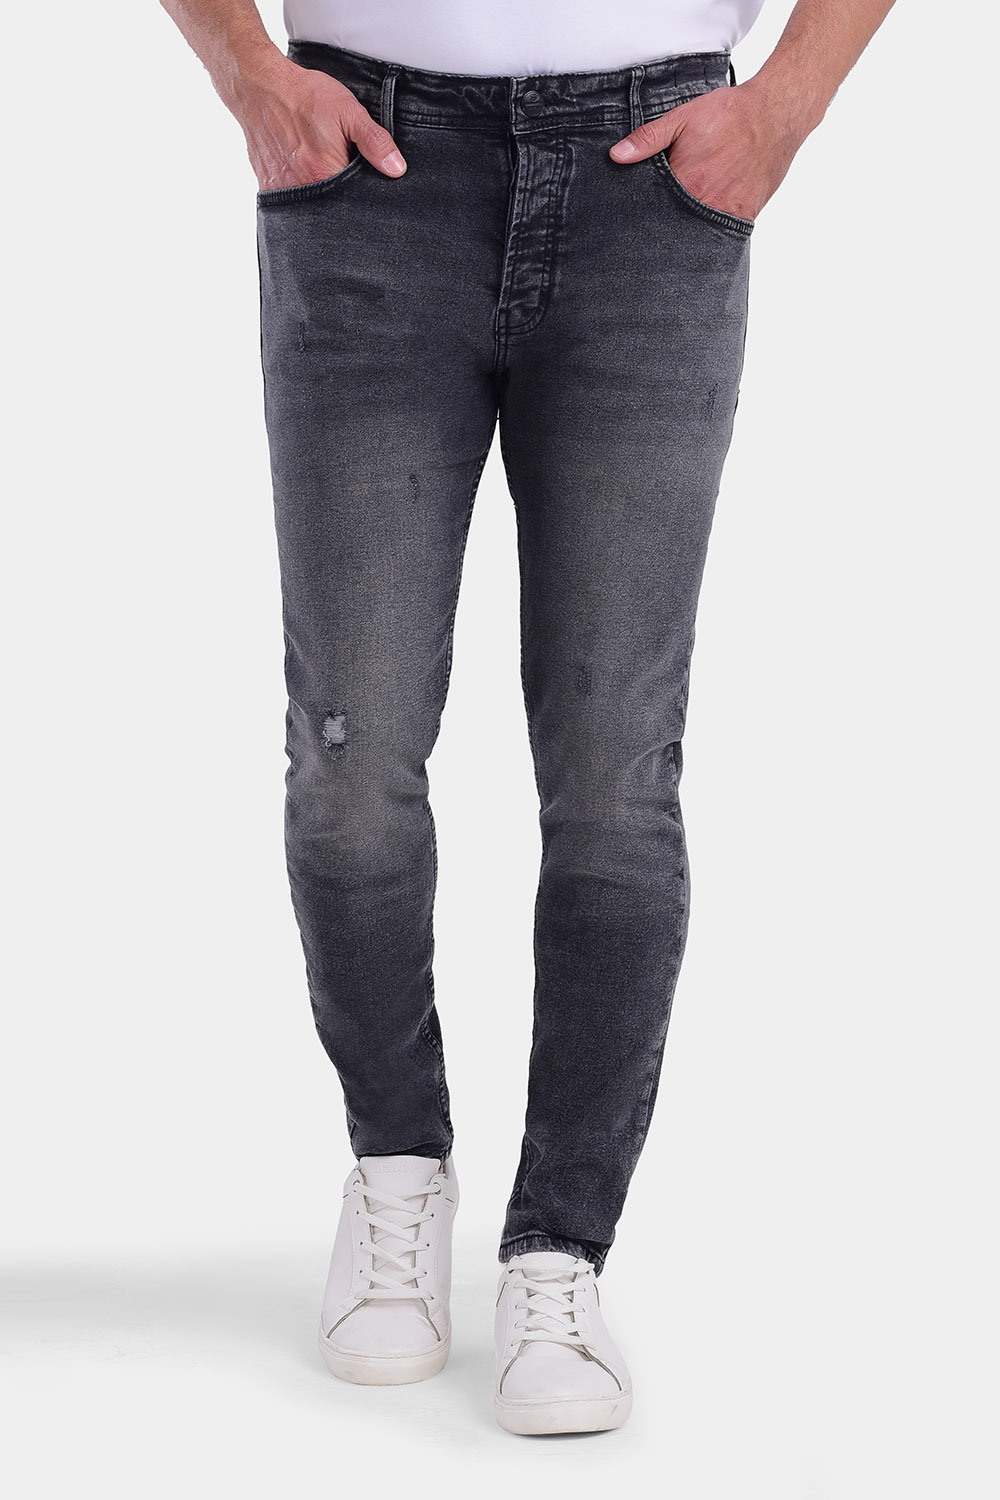 Skinny Trousers Gray - TIE HOUSE